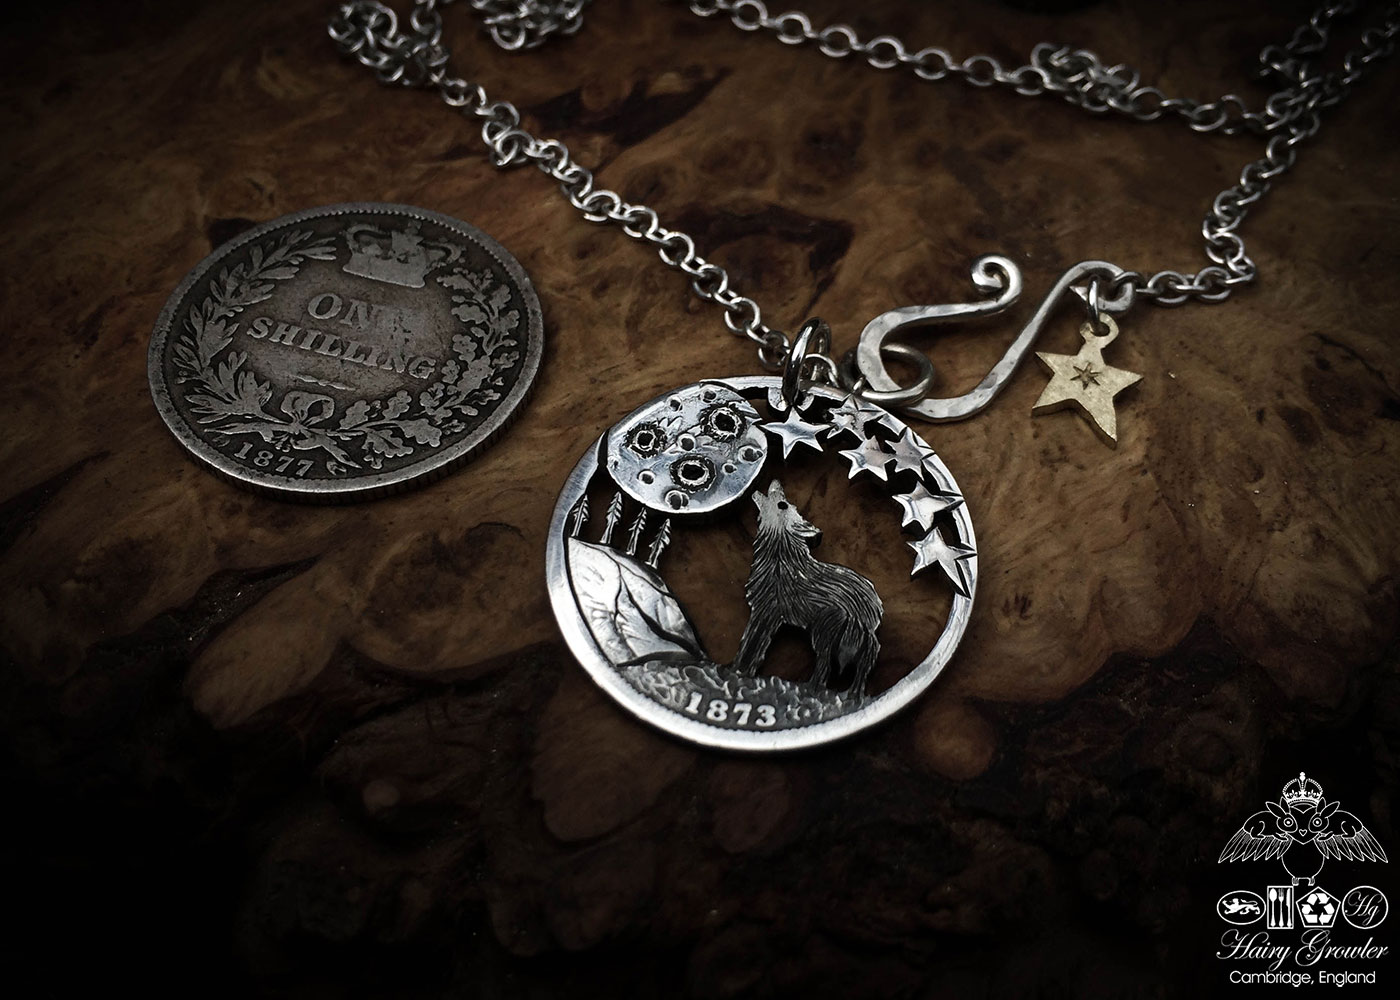 Handcrafted and recycled silver shilling The Silver Shilling collection. silver wolf necklace totally handcrafted and recycled from old sterling silver shilling coins. Designed and created by Hairy Growler Jewellery, Cambridge, UK. necklace